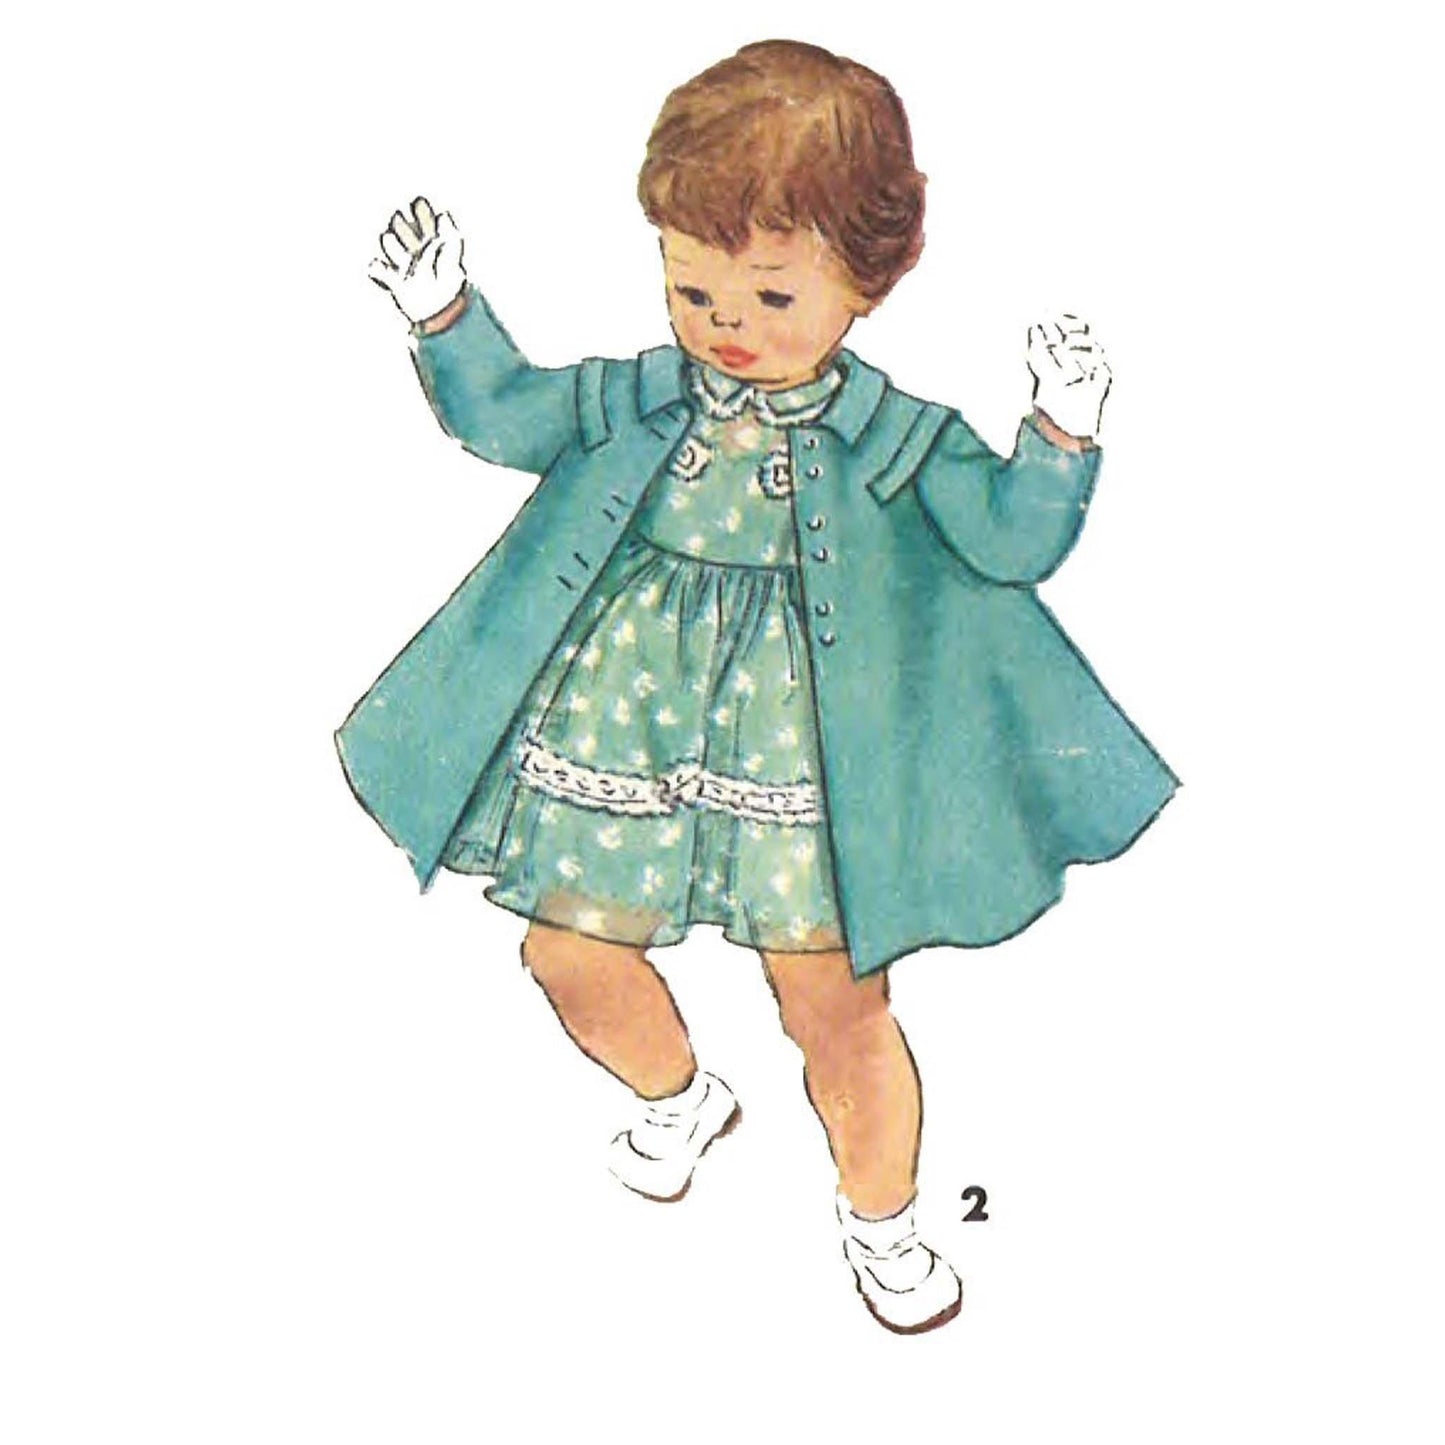 Toddler Wearing a  One-Piece Dress & Coat 